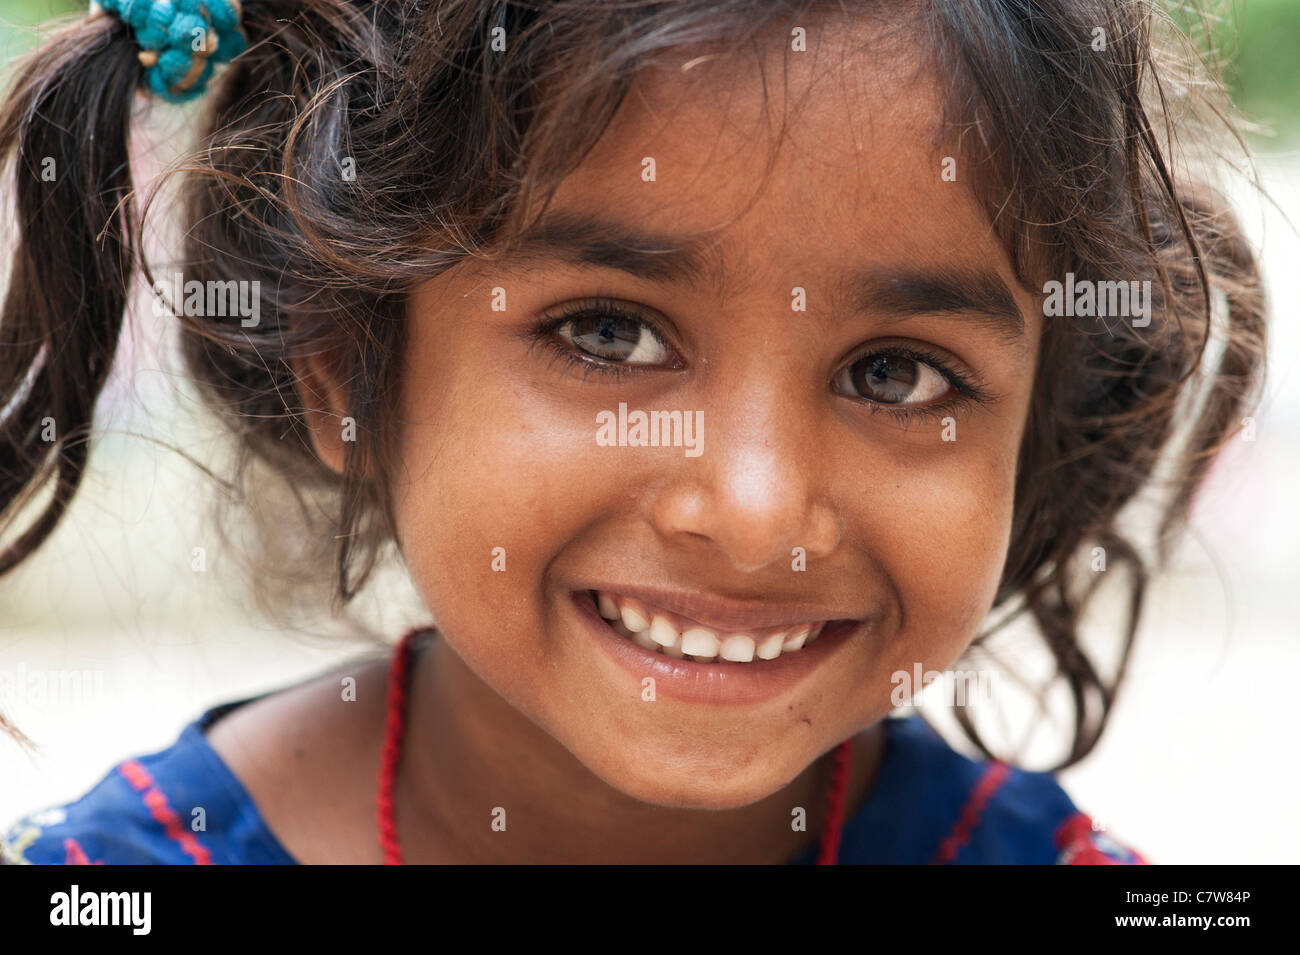 Young poor lower caste Indian street girl smiling Stock Photo